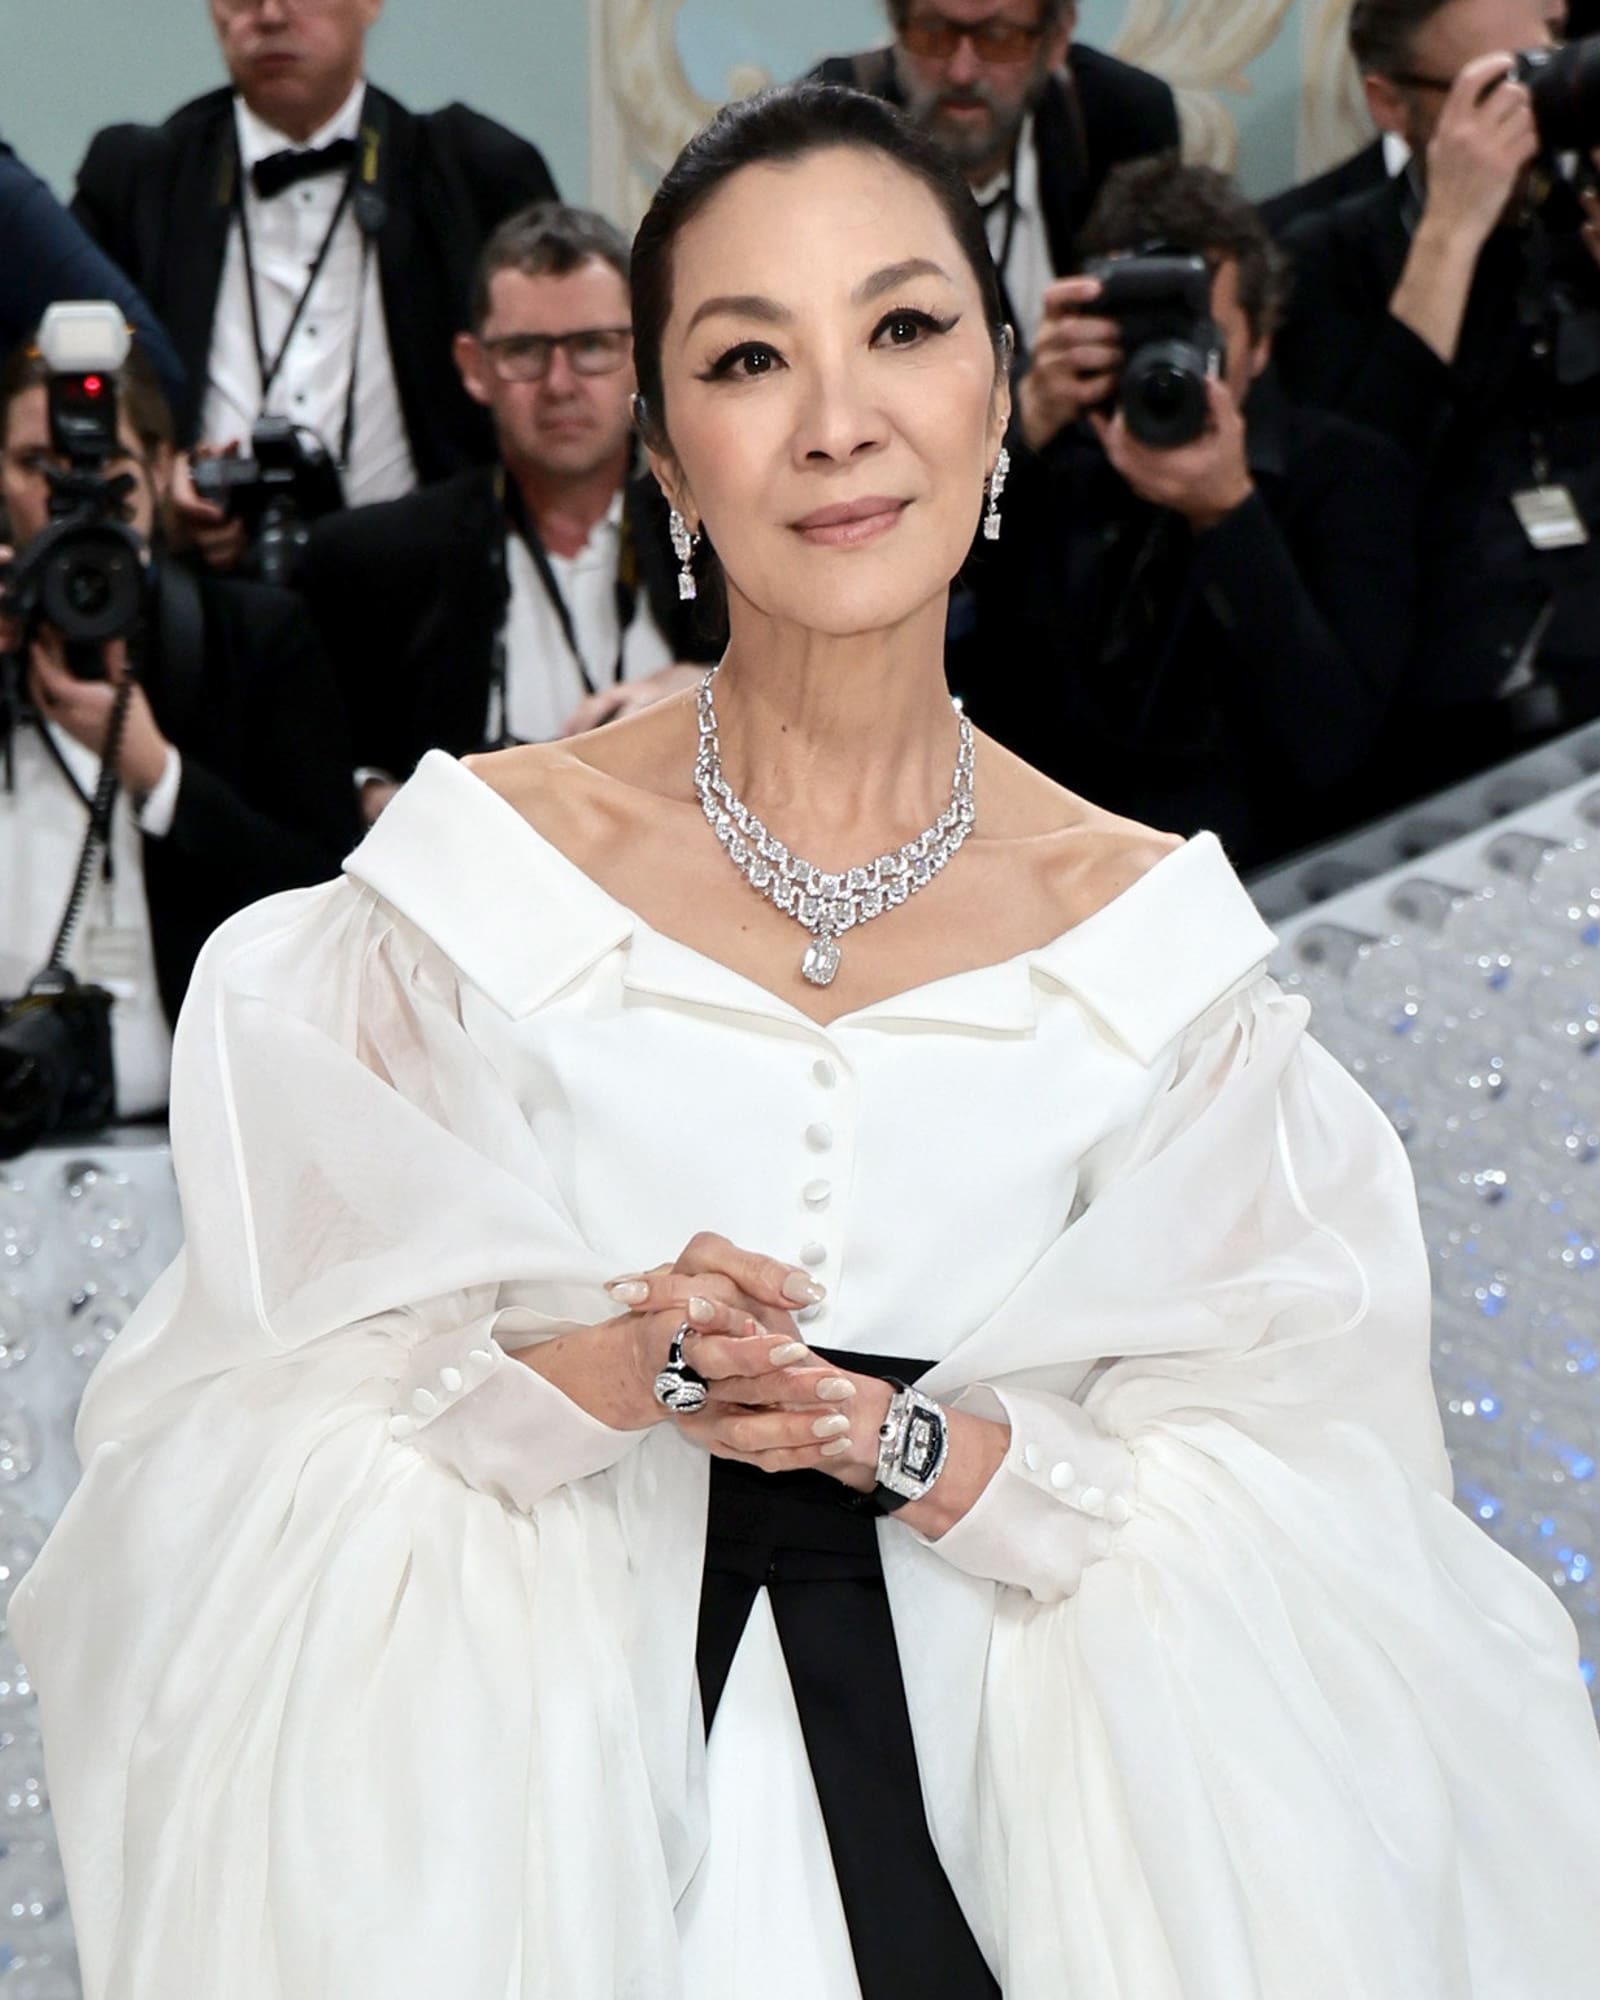 Michelle Yeoh wearing the Cartier [Sur]naturel High Jewelry necklace, and earrings in the Met Gala 2023